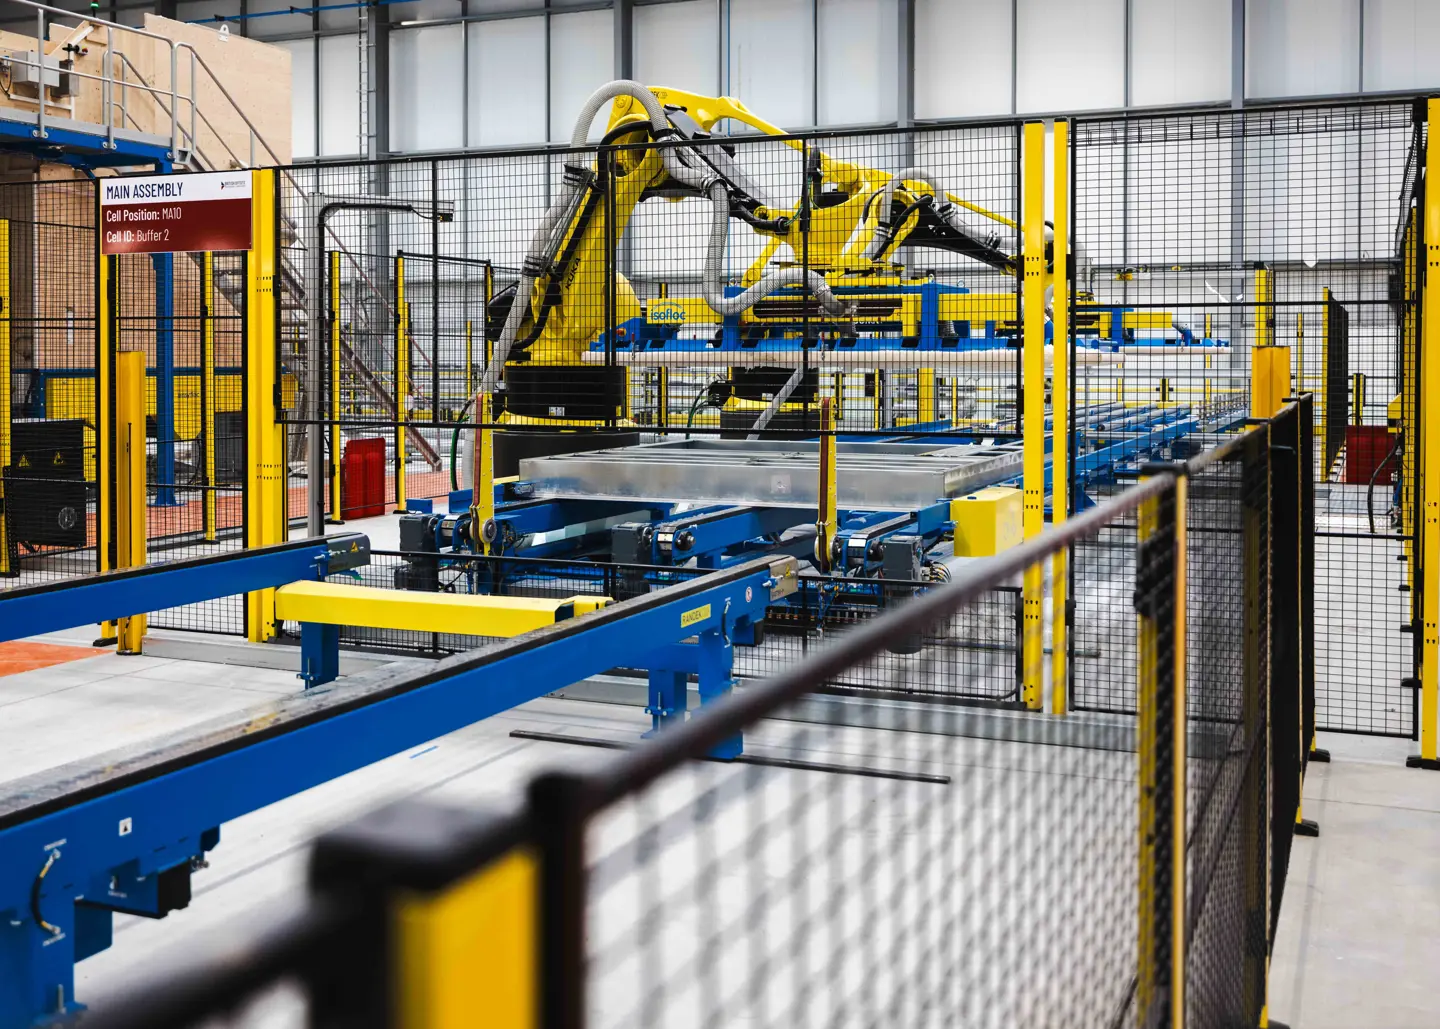 Machine mesh guarding fencing around a robotic arm and production line.